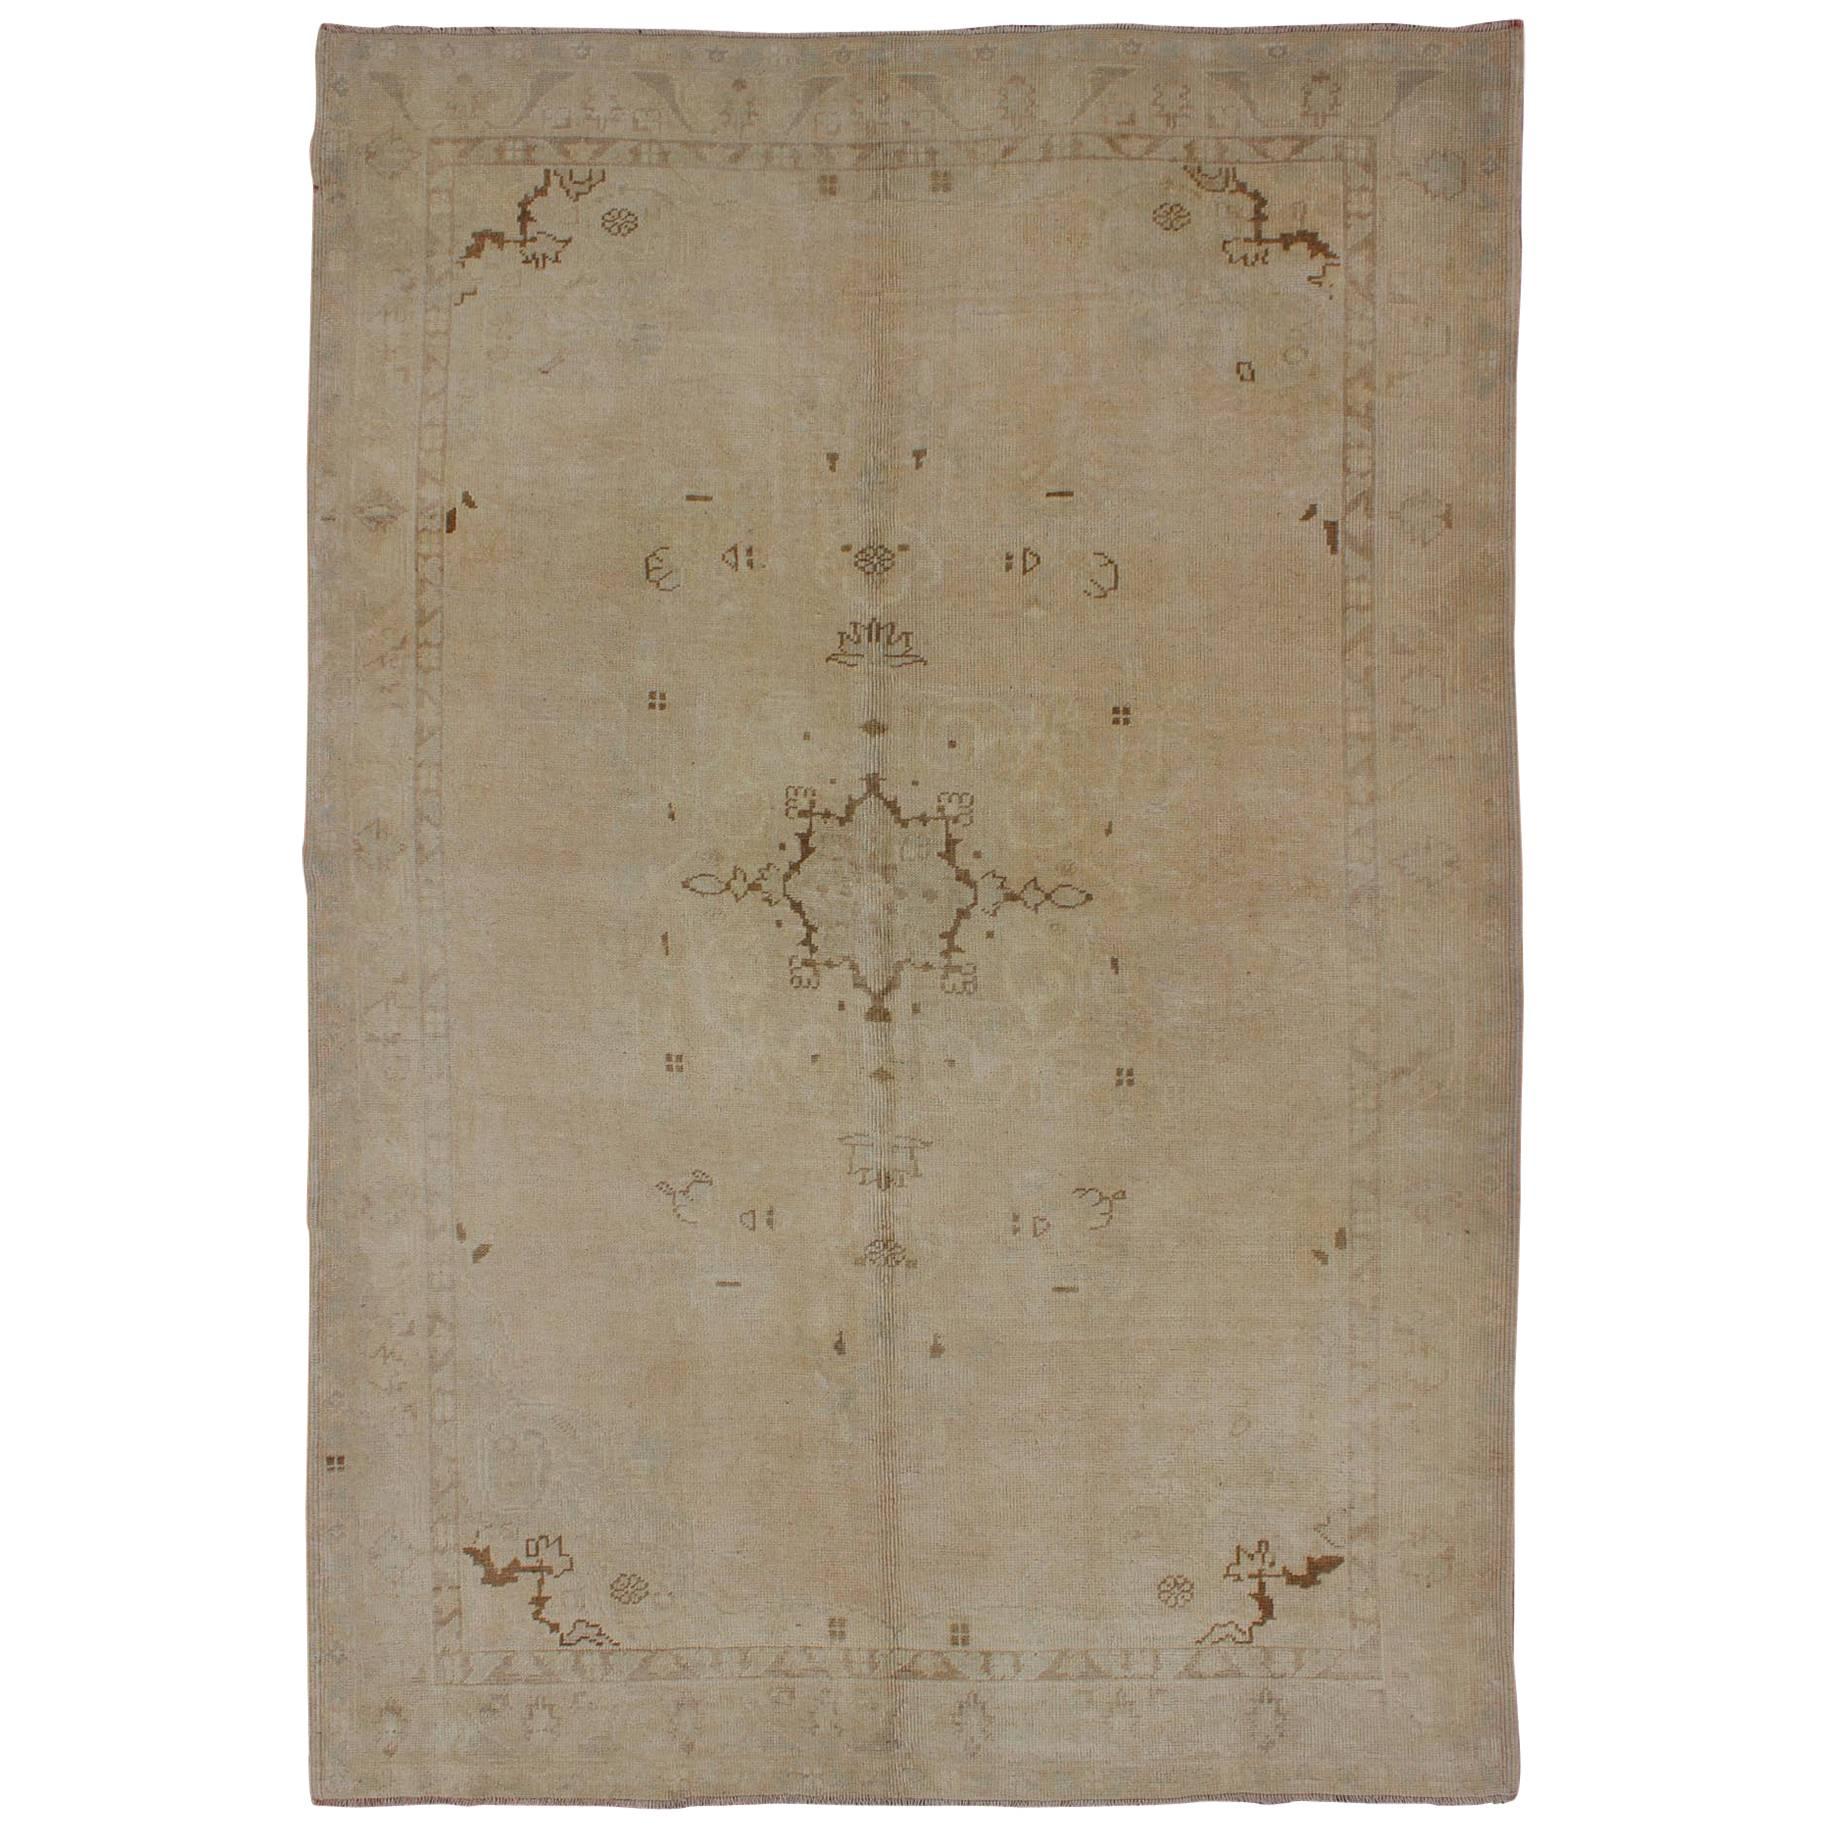 Midcentury Vintage Turkish Oushak Rug with Stylized Floral Design in Cream